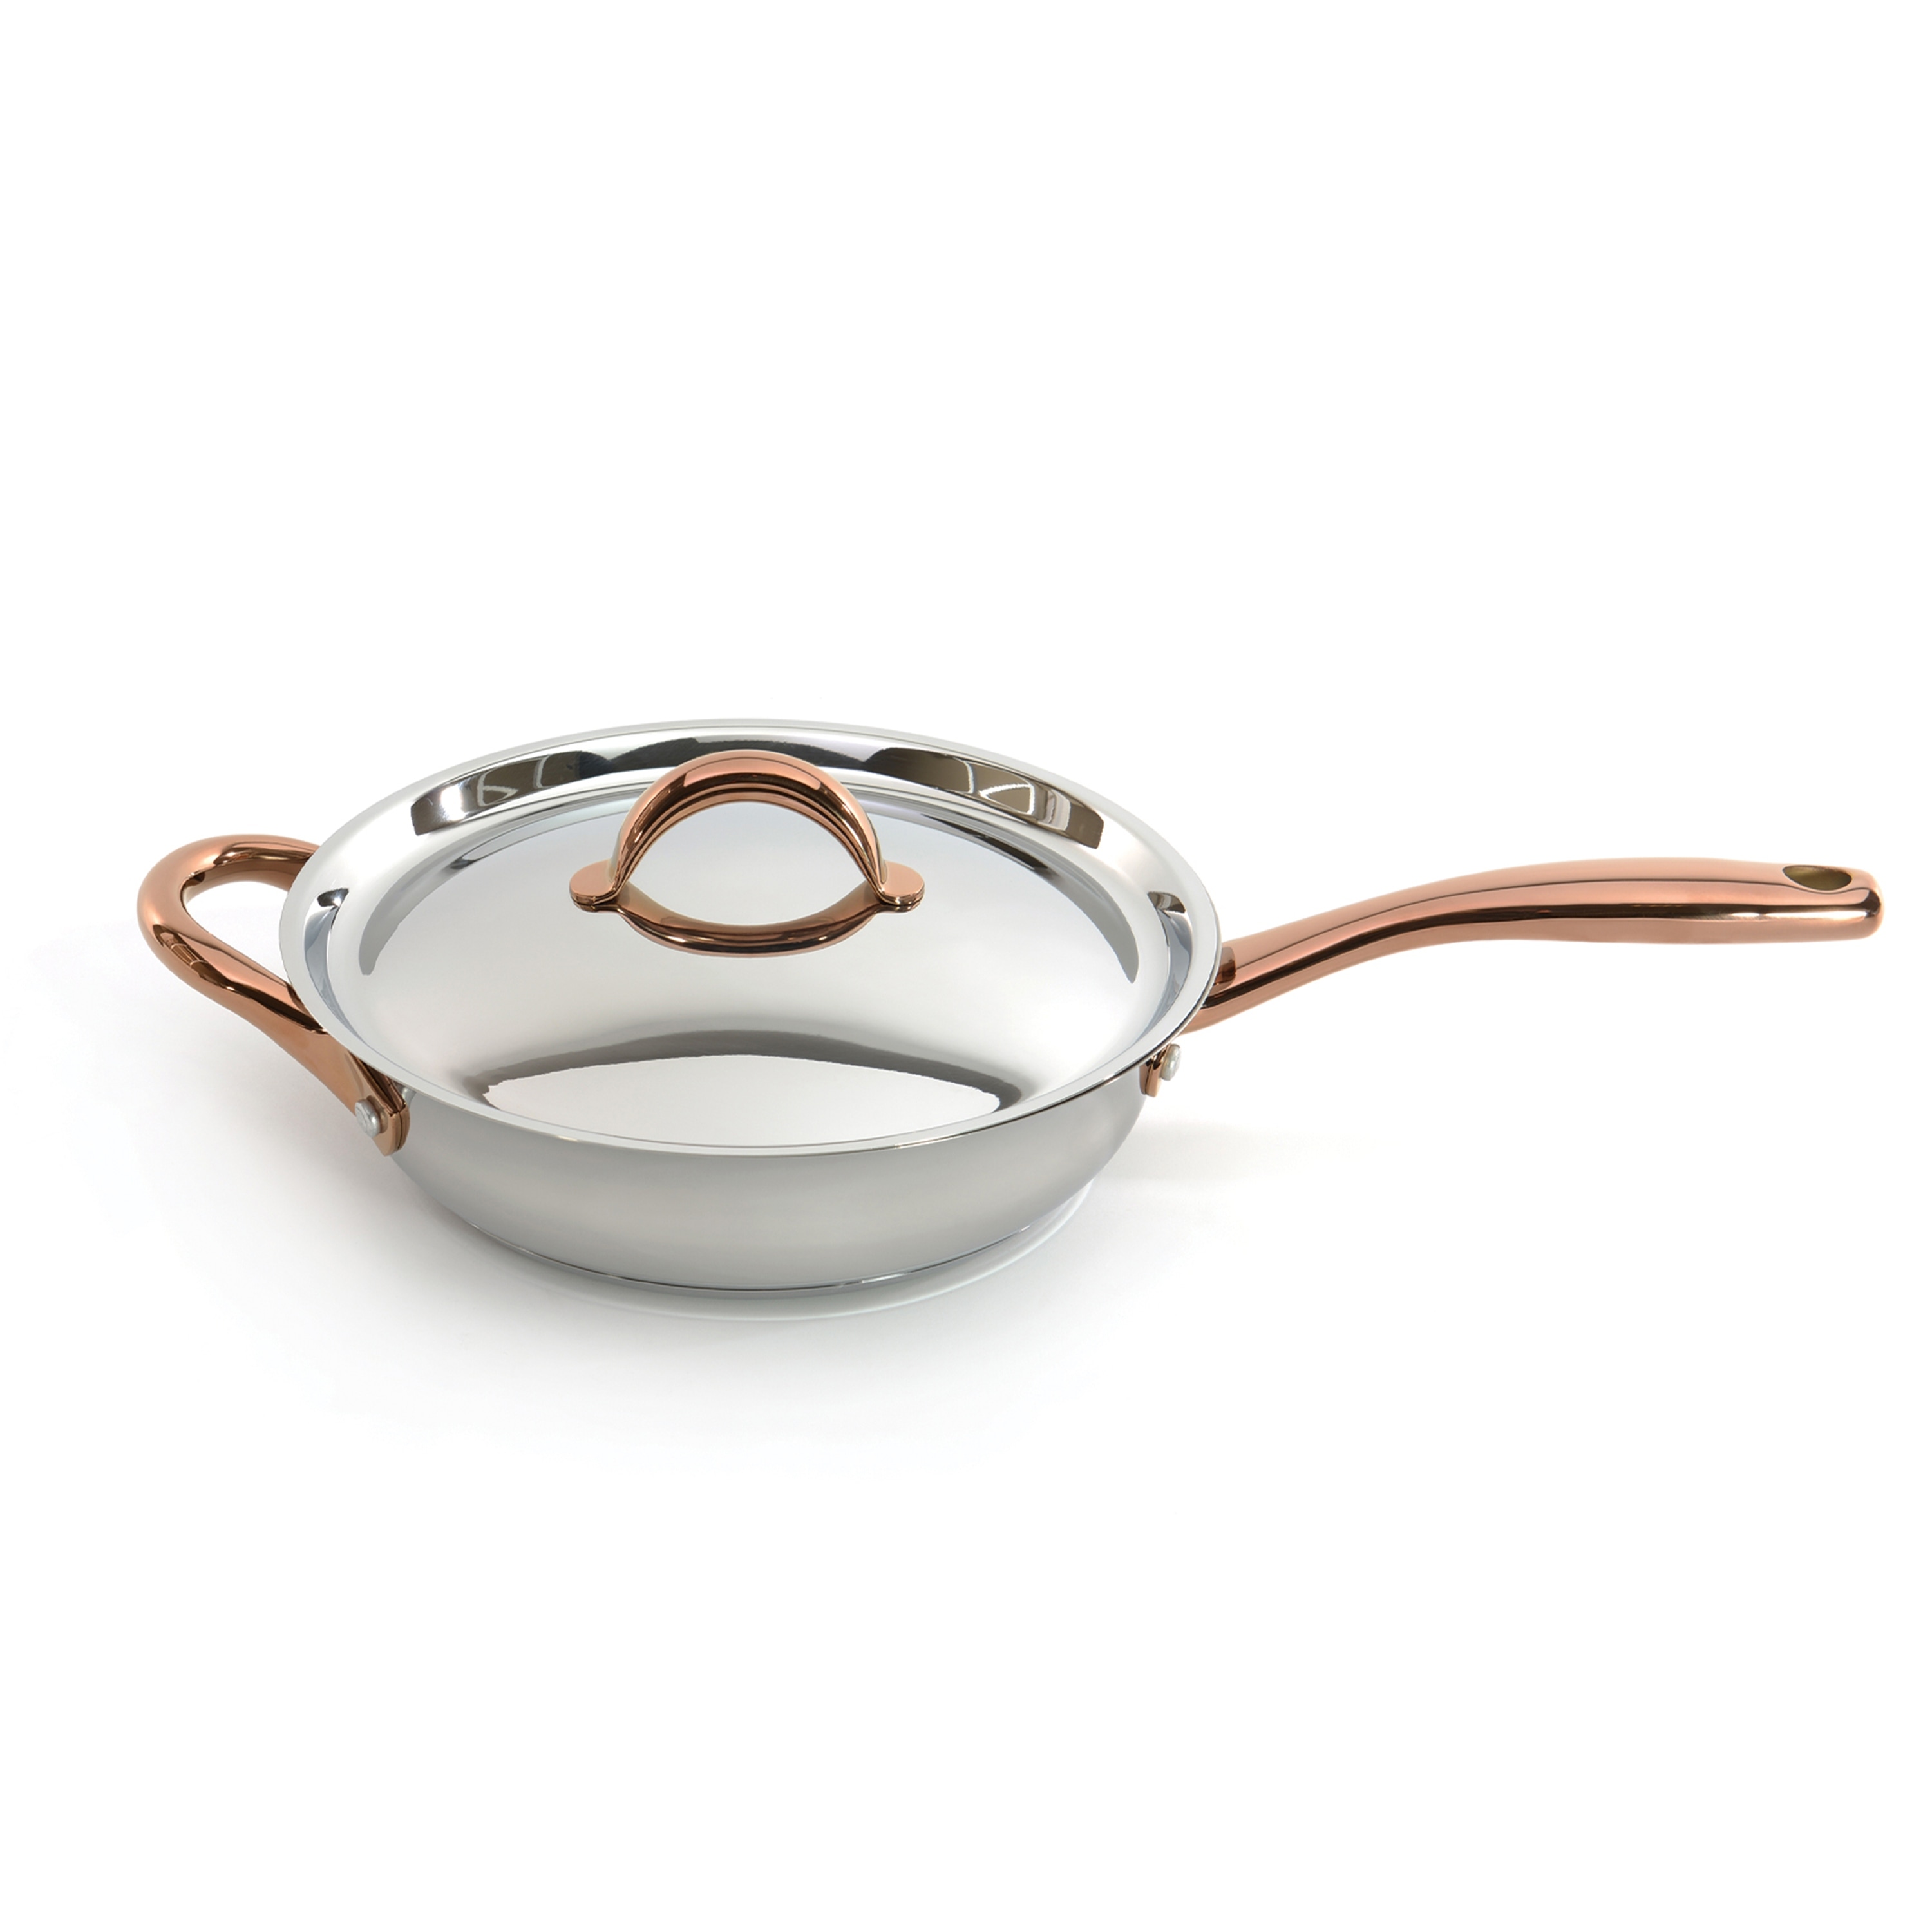 https://ak1.ostkcdn.com/images/products/is/images/direct/e1502af4940f9066f8eb4c64b5845ce805b5dca3/Ouro-Gold-9.5%22-Covered-Deep-Skillet-with-Lid-and-Two-Side-Handles-Metal-Lids.jpg